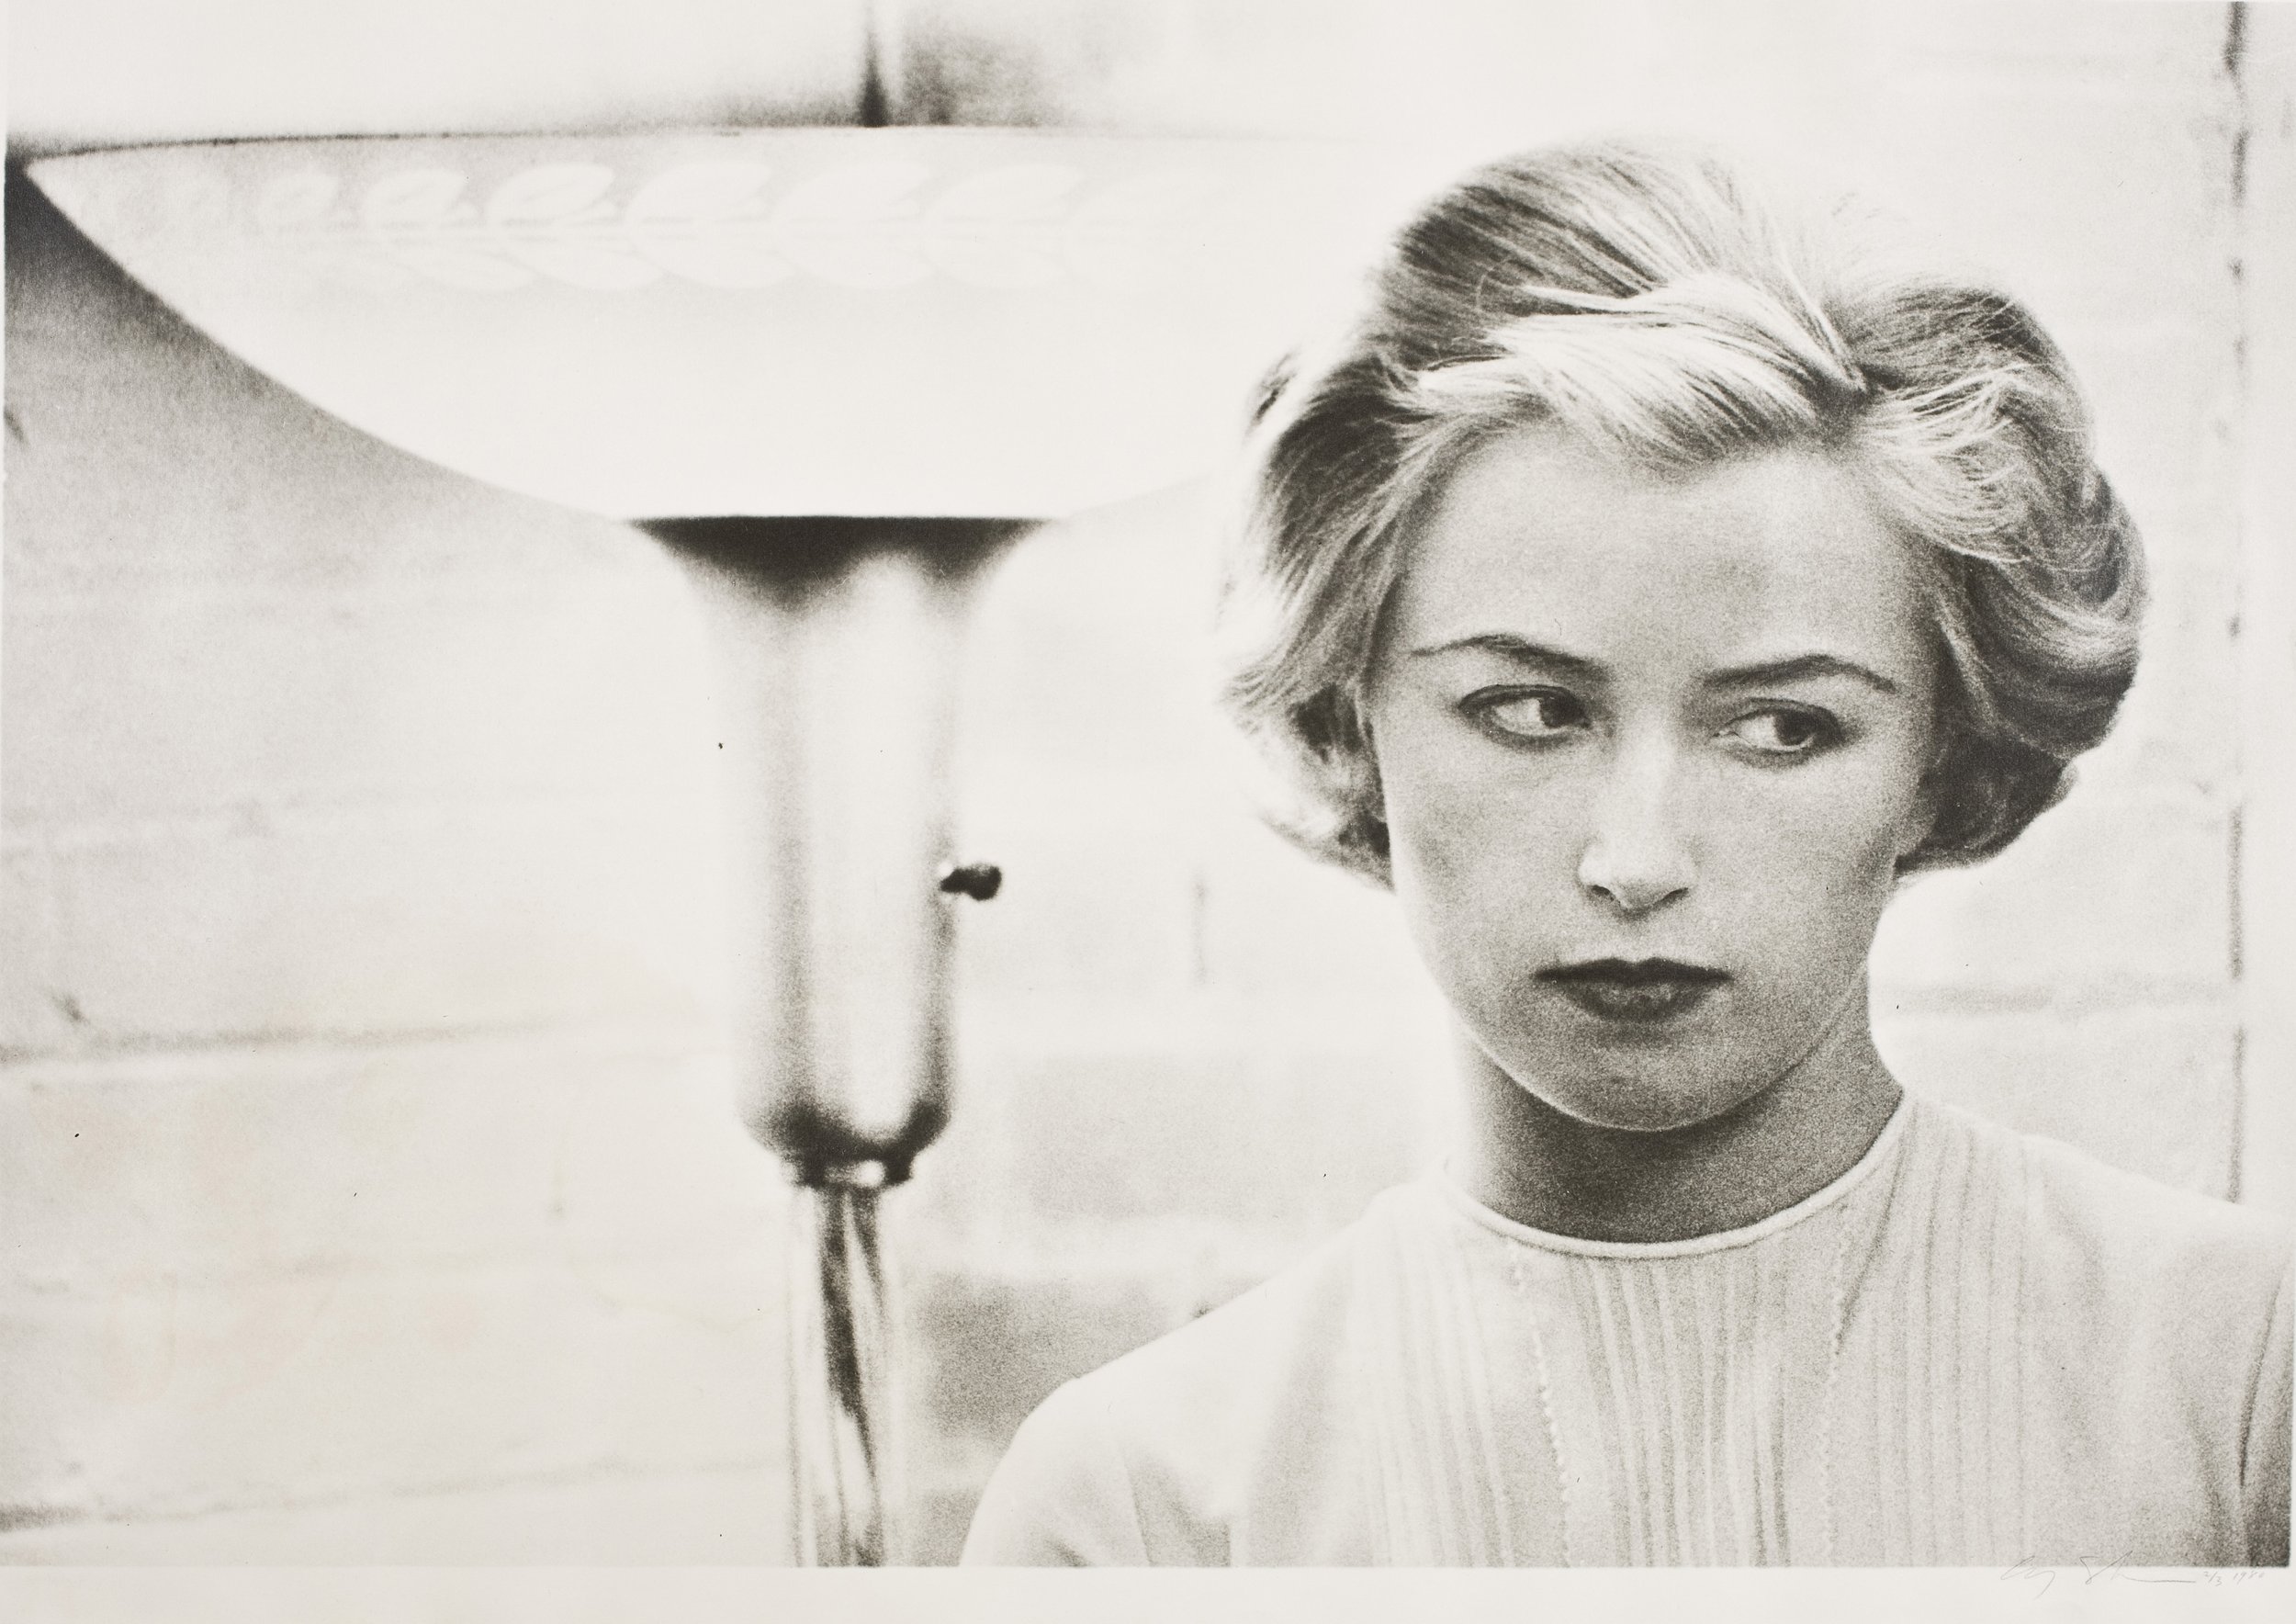  Cindy Sherman (American, b. 1954),  Untitled Film Still #53 (Blonde: Close-Up with Lamp) , 1980, Gift of Donald Droll in honor of Chloe Hamilton Young, 1984.18. 